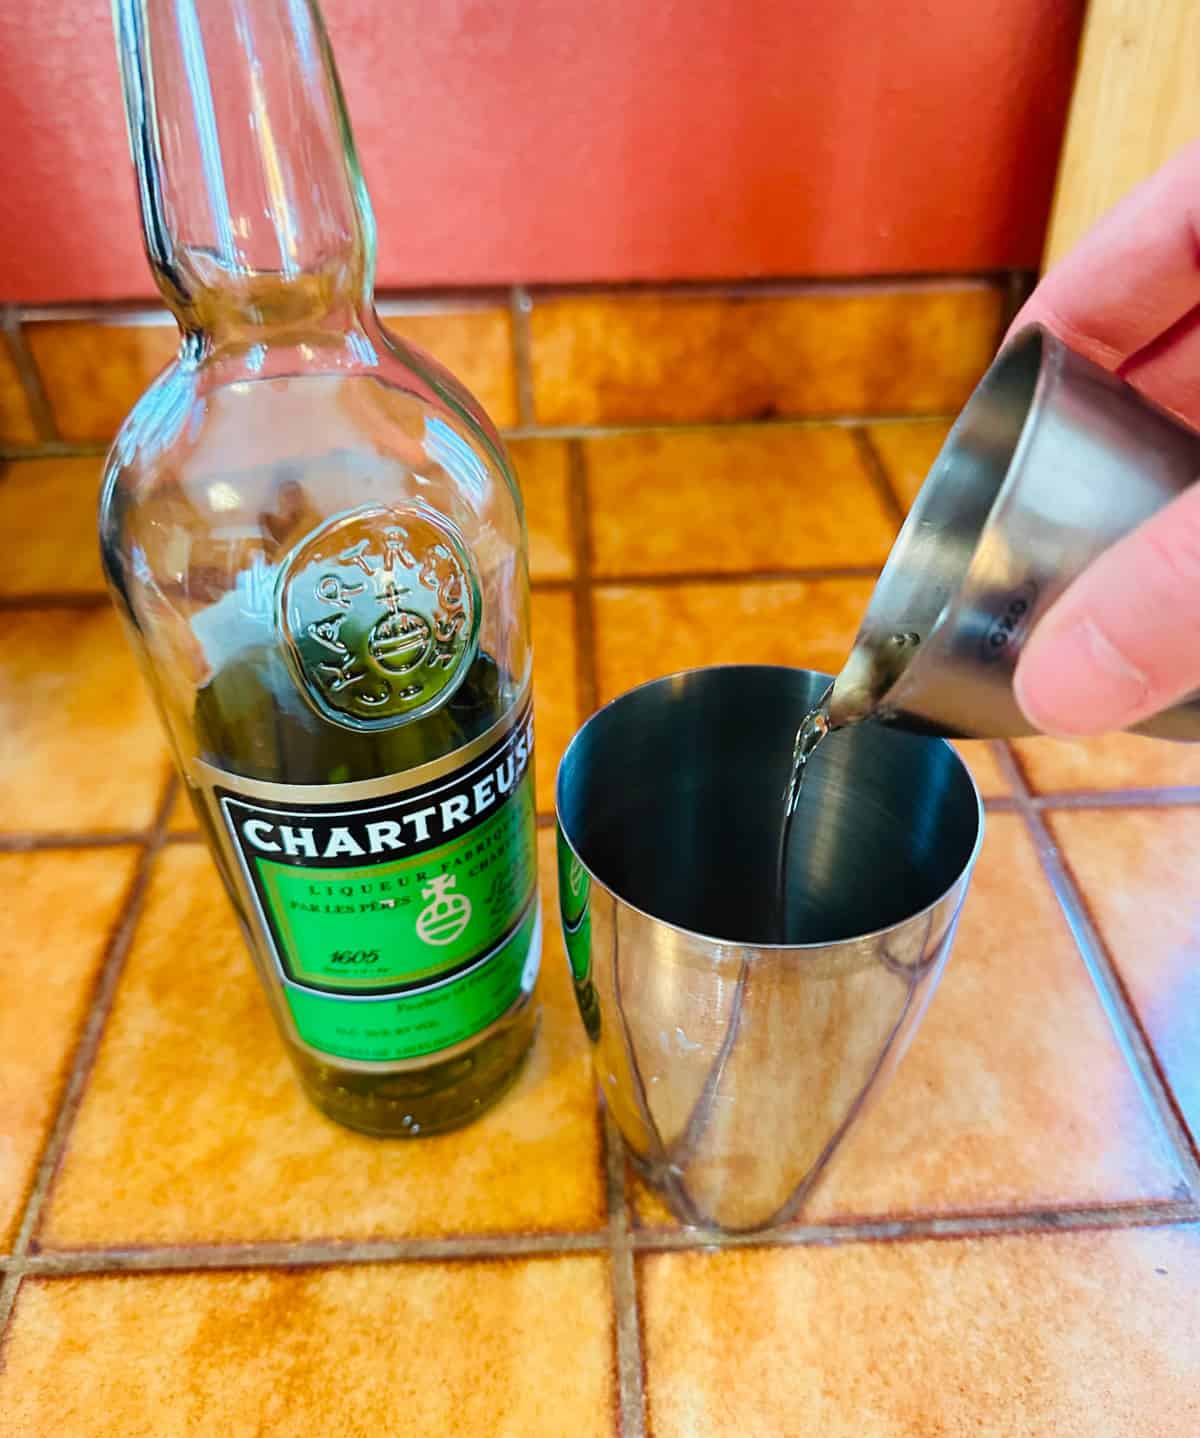 Pale green liquid being poured from a steel measuring jigger into a cocktail shaker next to a bottle of chartreuse.